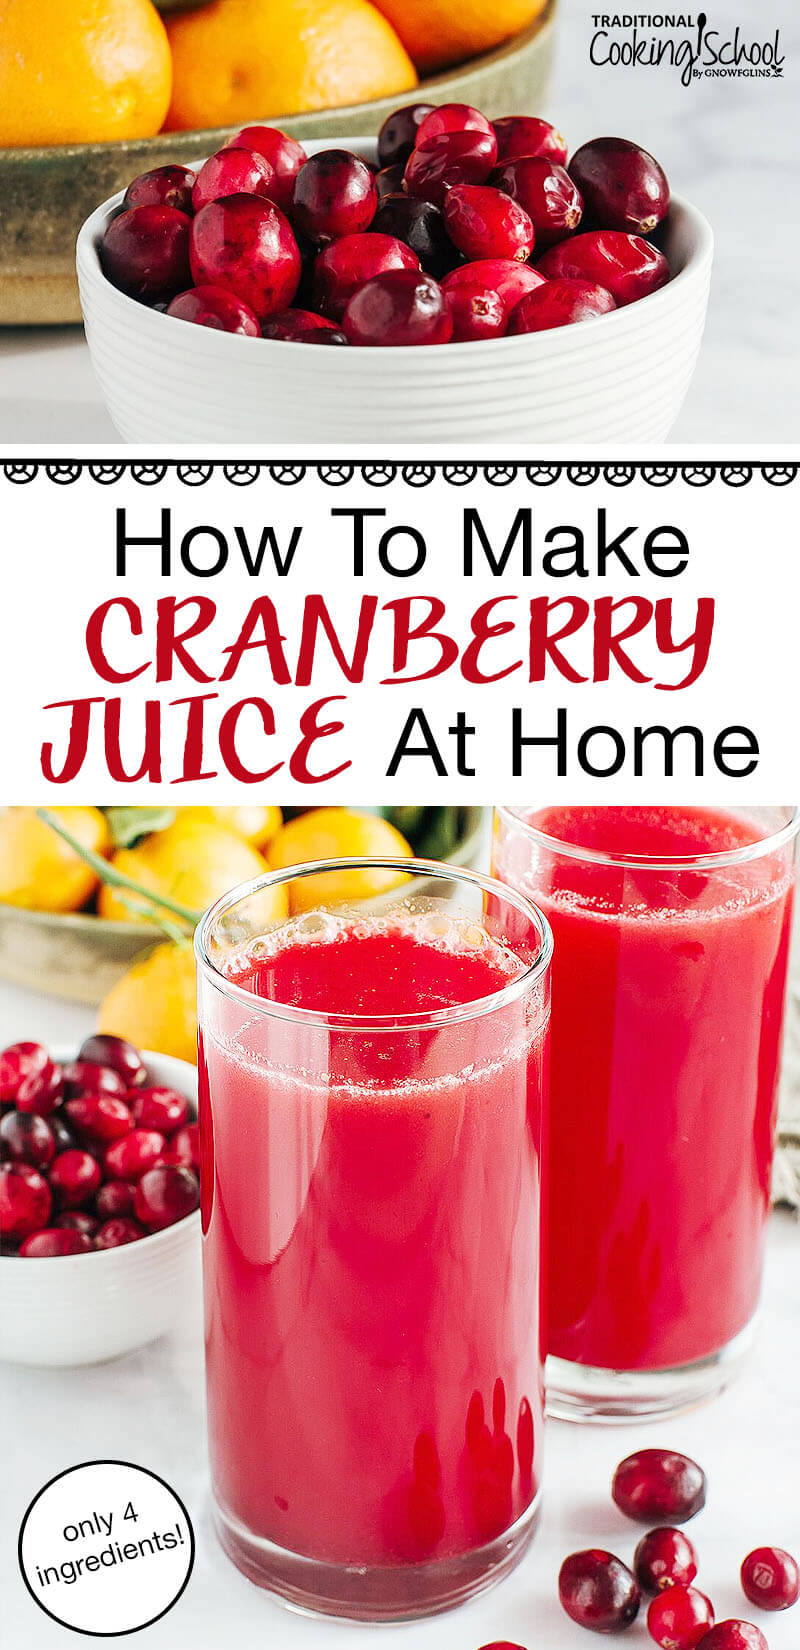 photo collage of fresh cranberries and homemade cranberry juice, with text overlay: "How To Make Cranberry Juice At Home (just 4 ingredients!)"